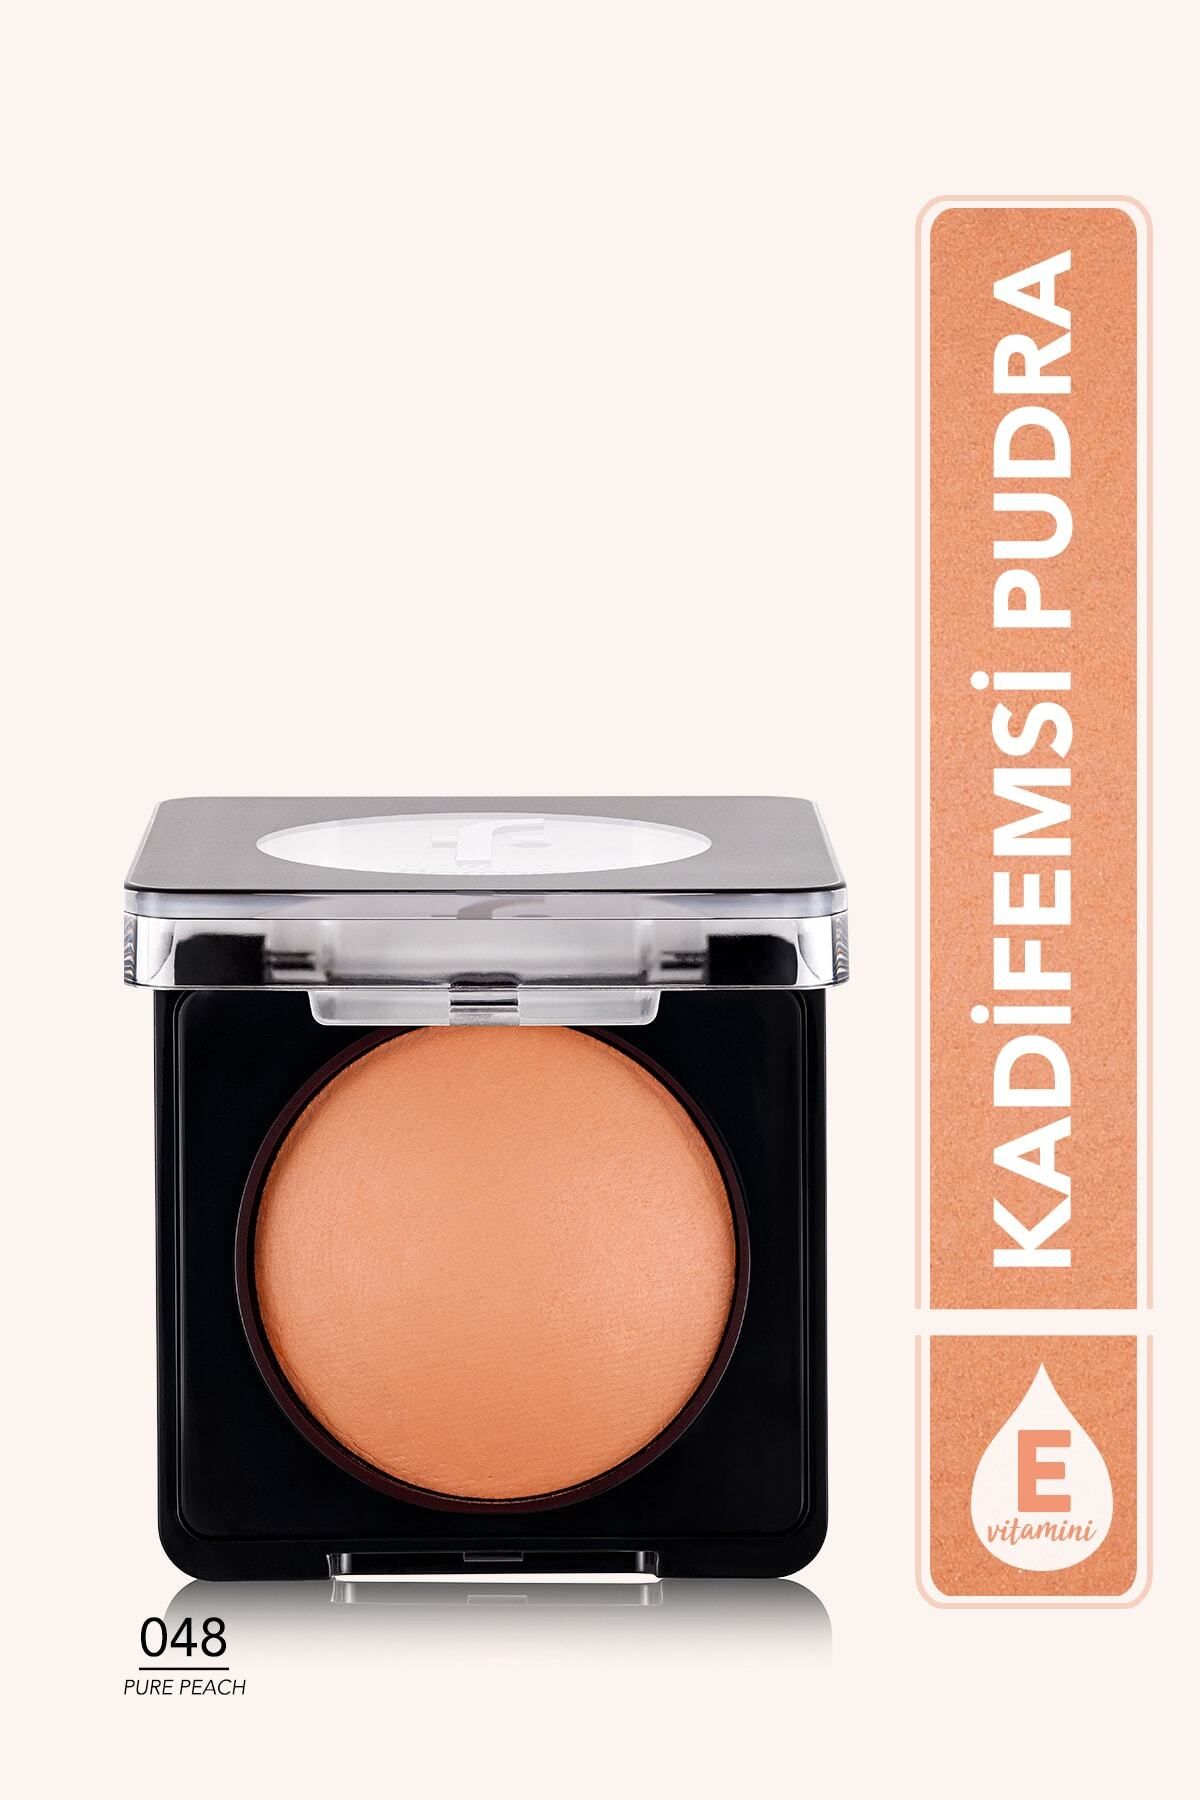 Flormar SHİMMERİNG BAKED BLUSH - BAKED BLUSH-ON - 048 PURE PEACH - PSSN1148